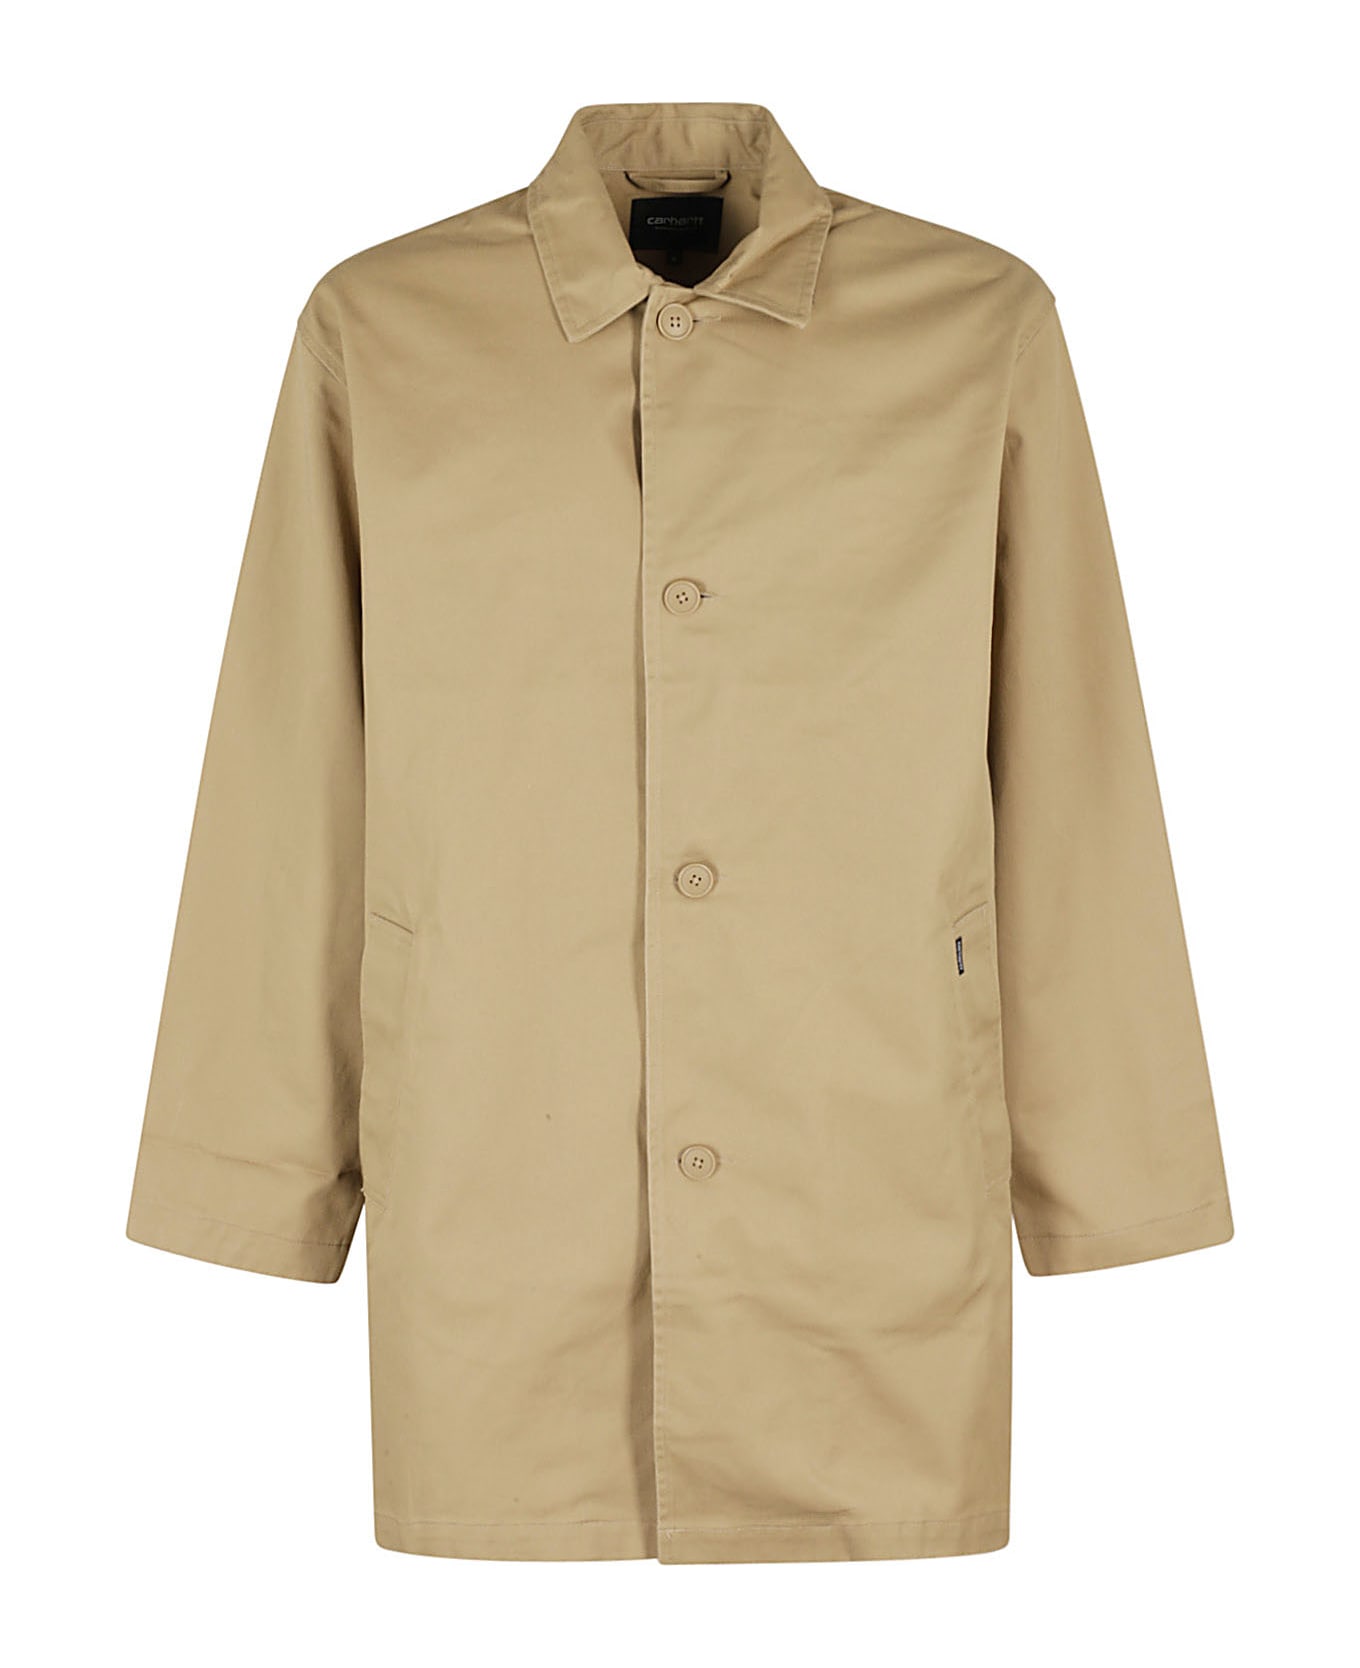 Carhartt Newhaven Coat - Sable Rinsed